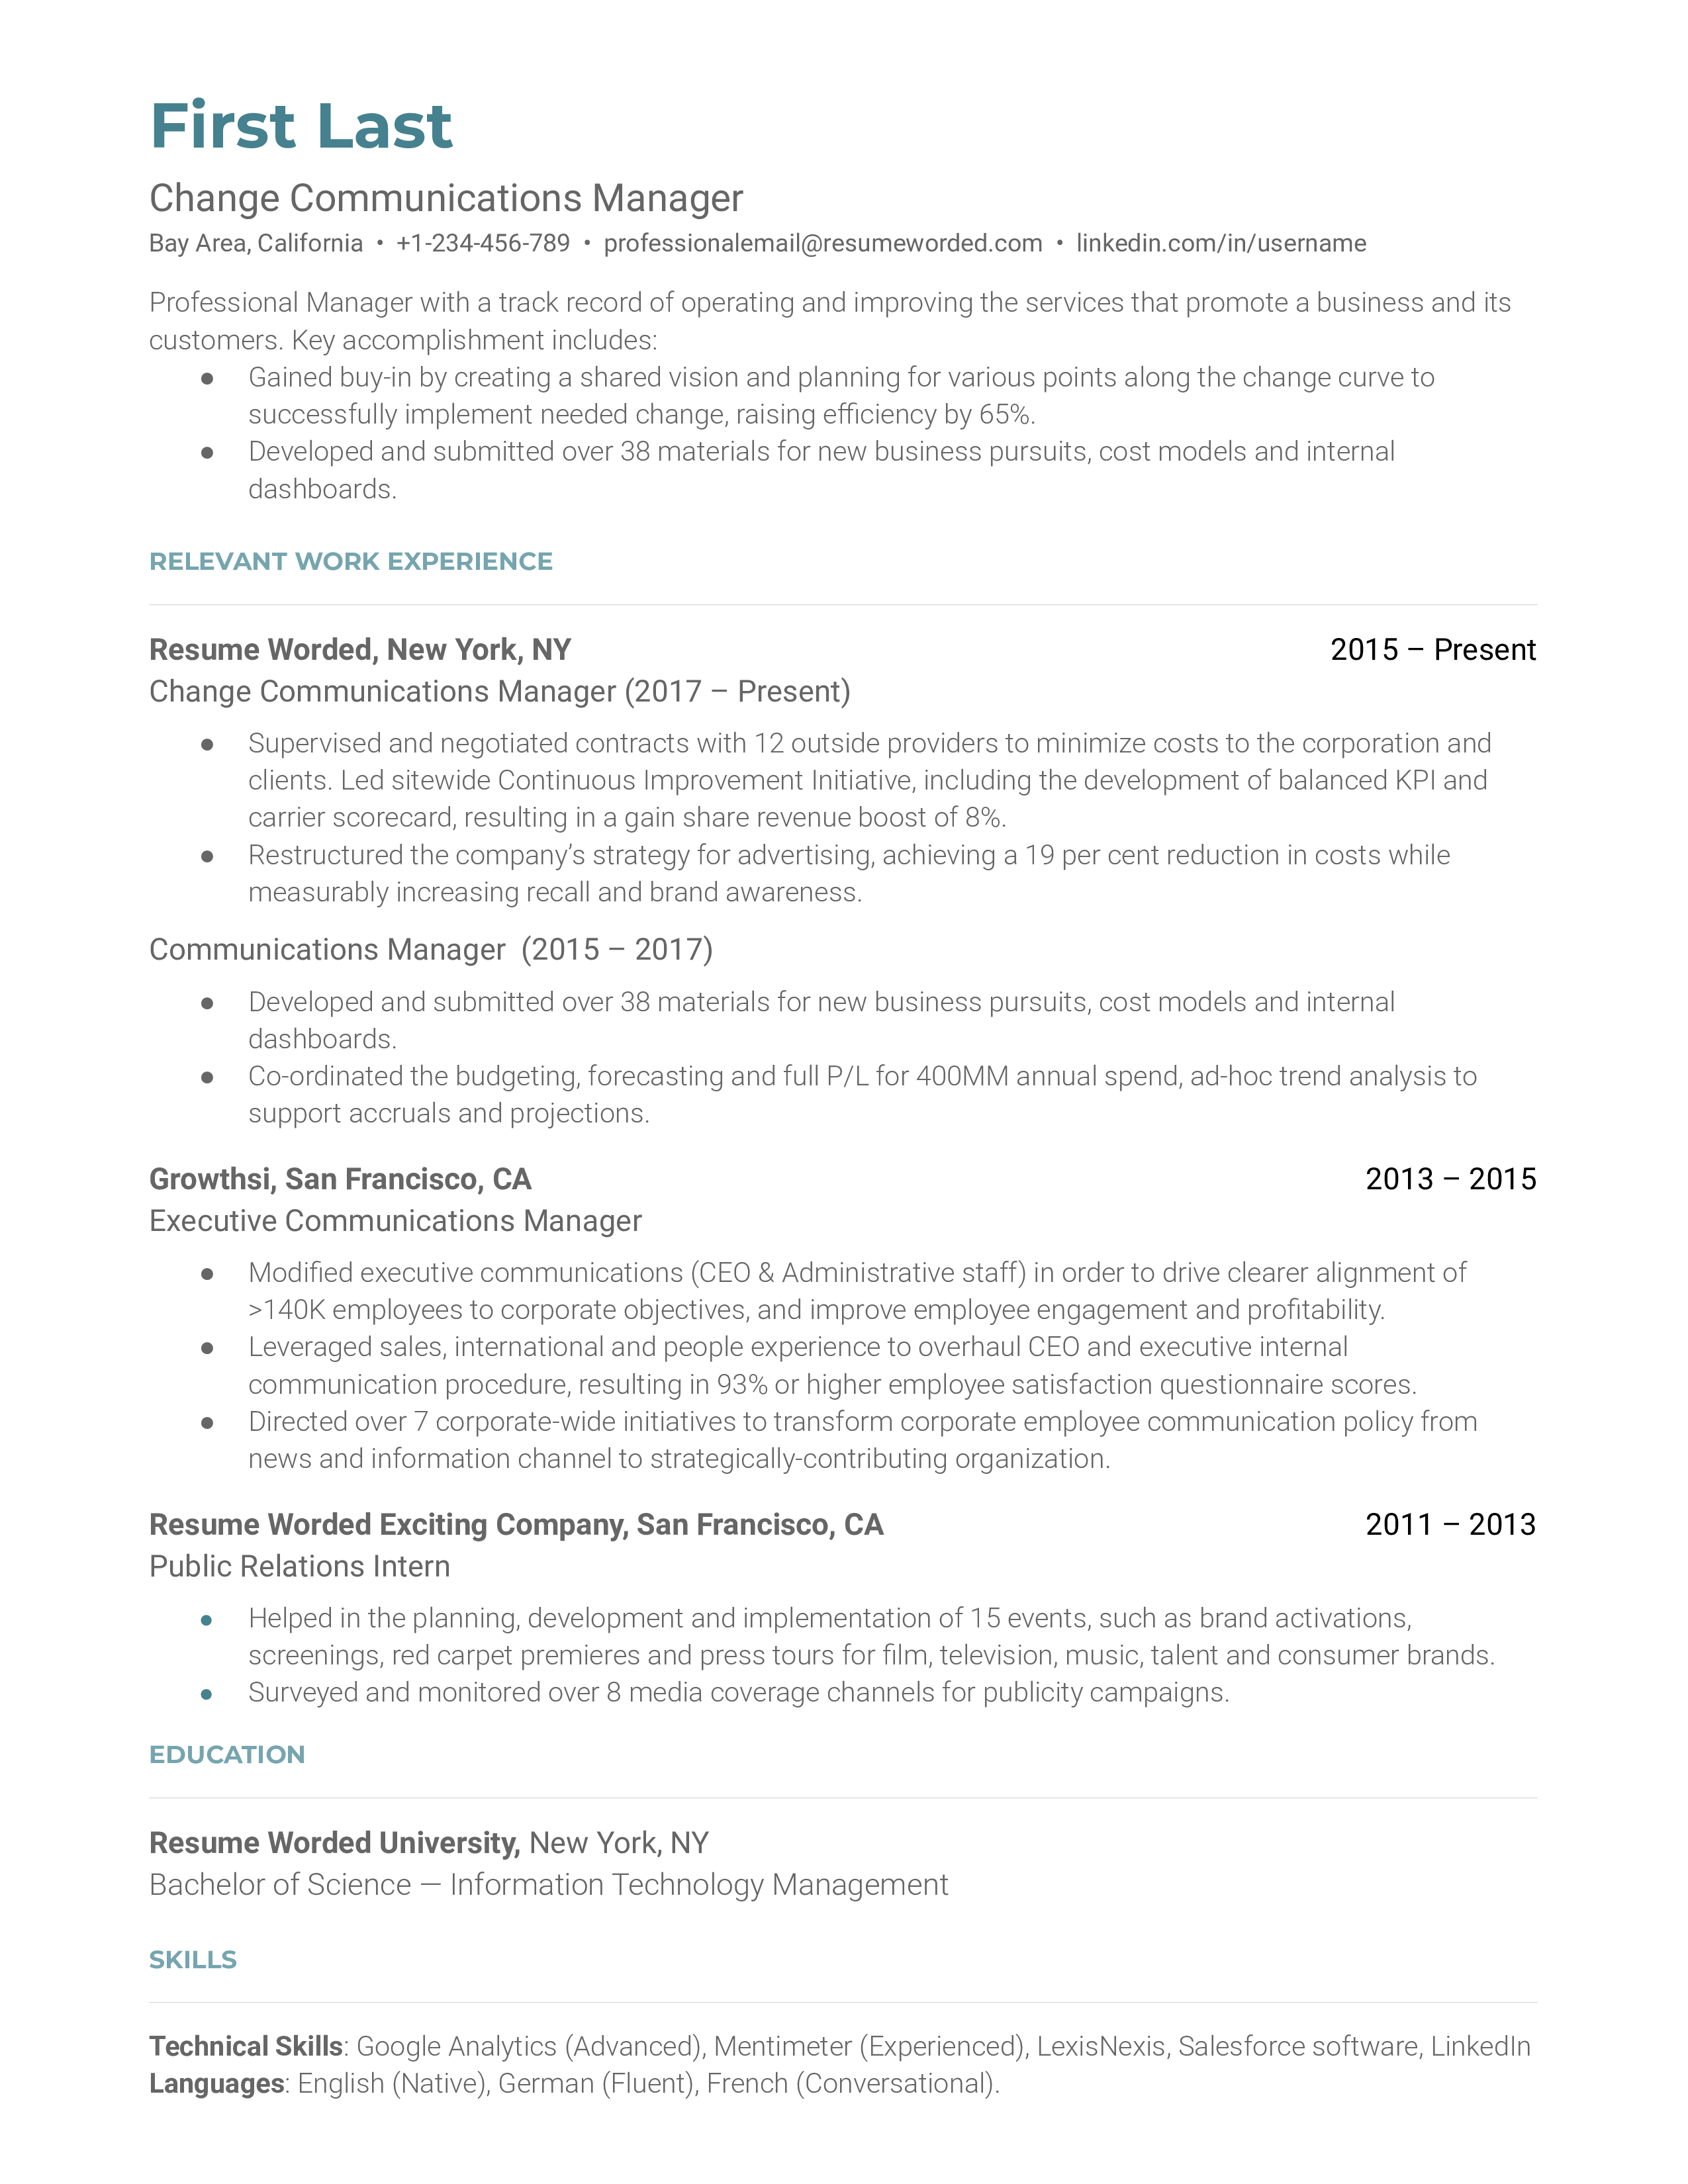 A well-structured CV of a Change Communications Manager showcasing adaptability and proficiency in communication tools.